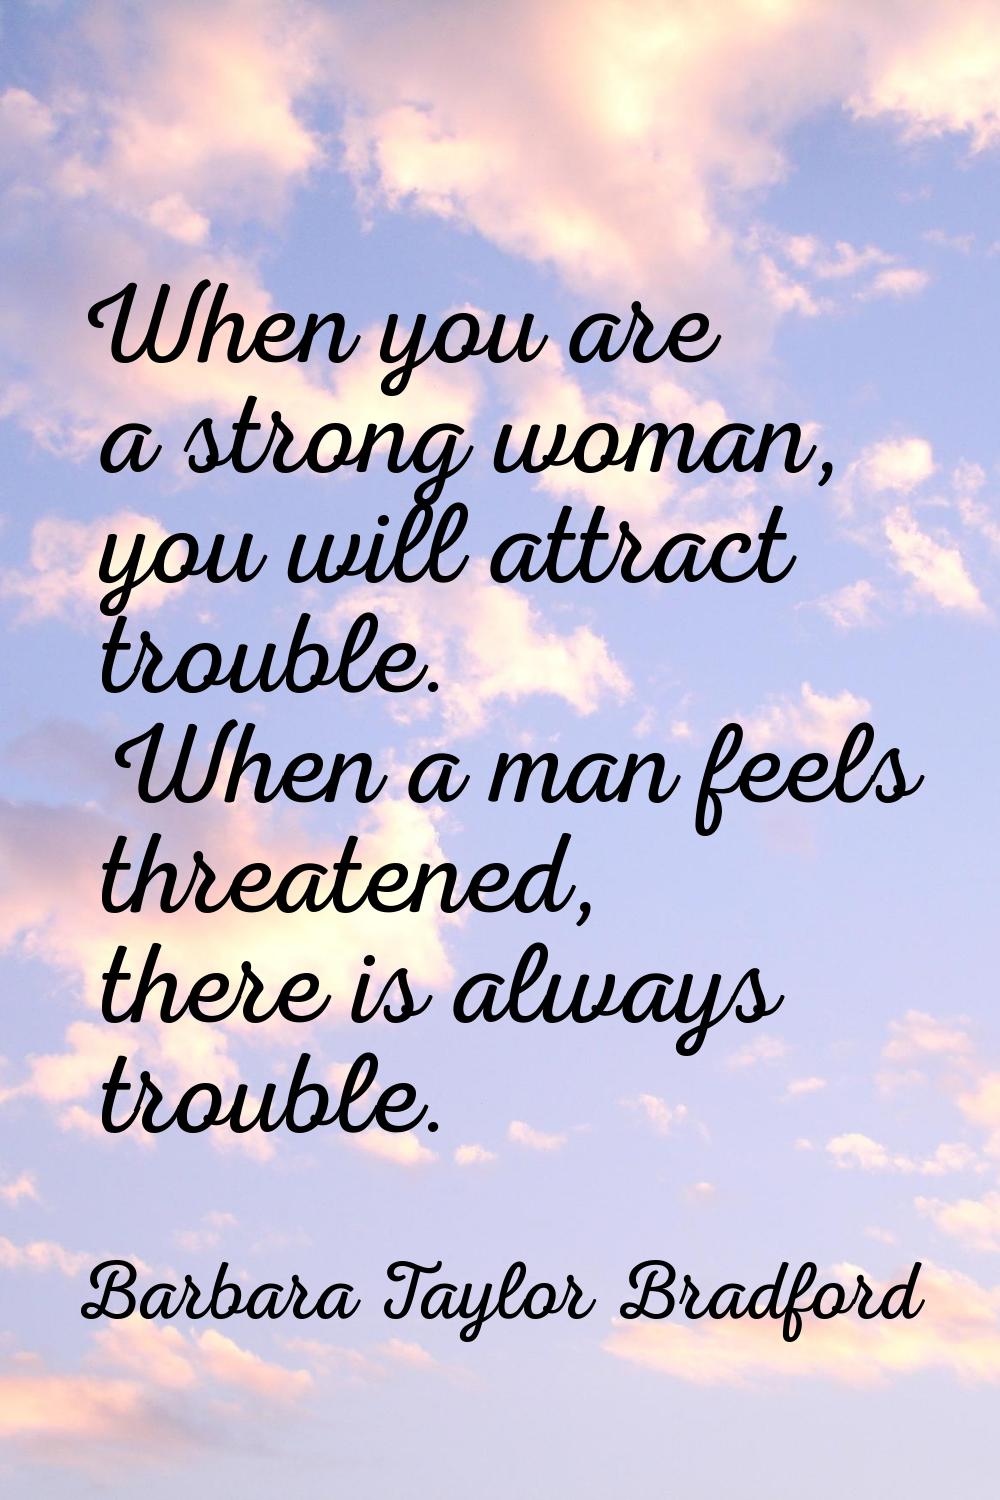 When you are a strong woman, you will attract trouble. When a man feels threatened, there is always